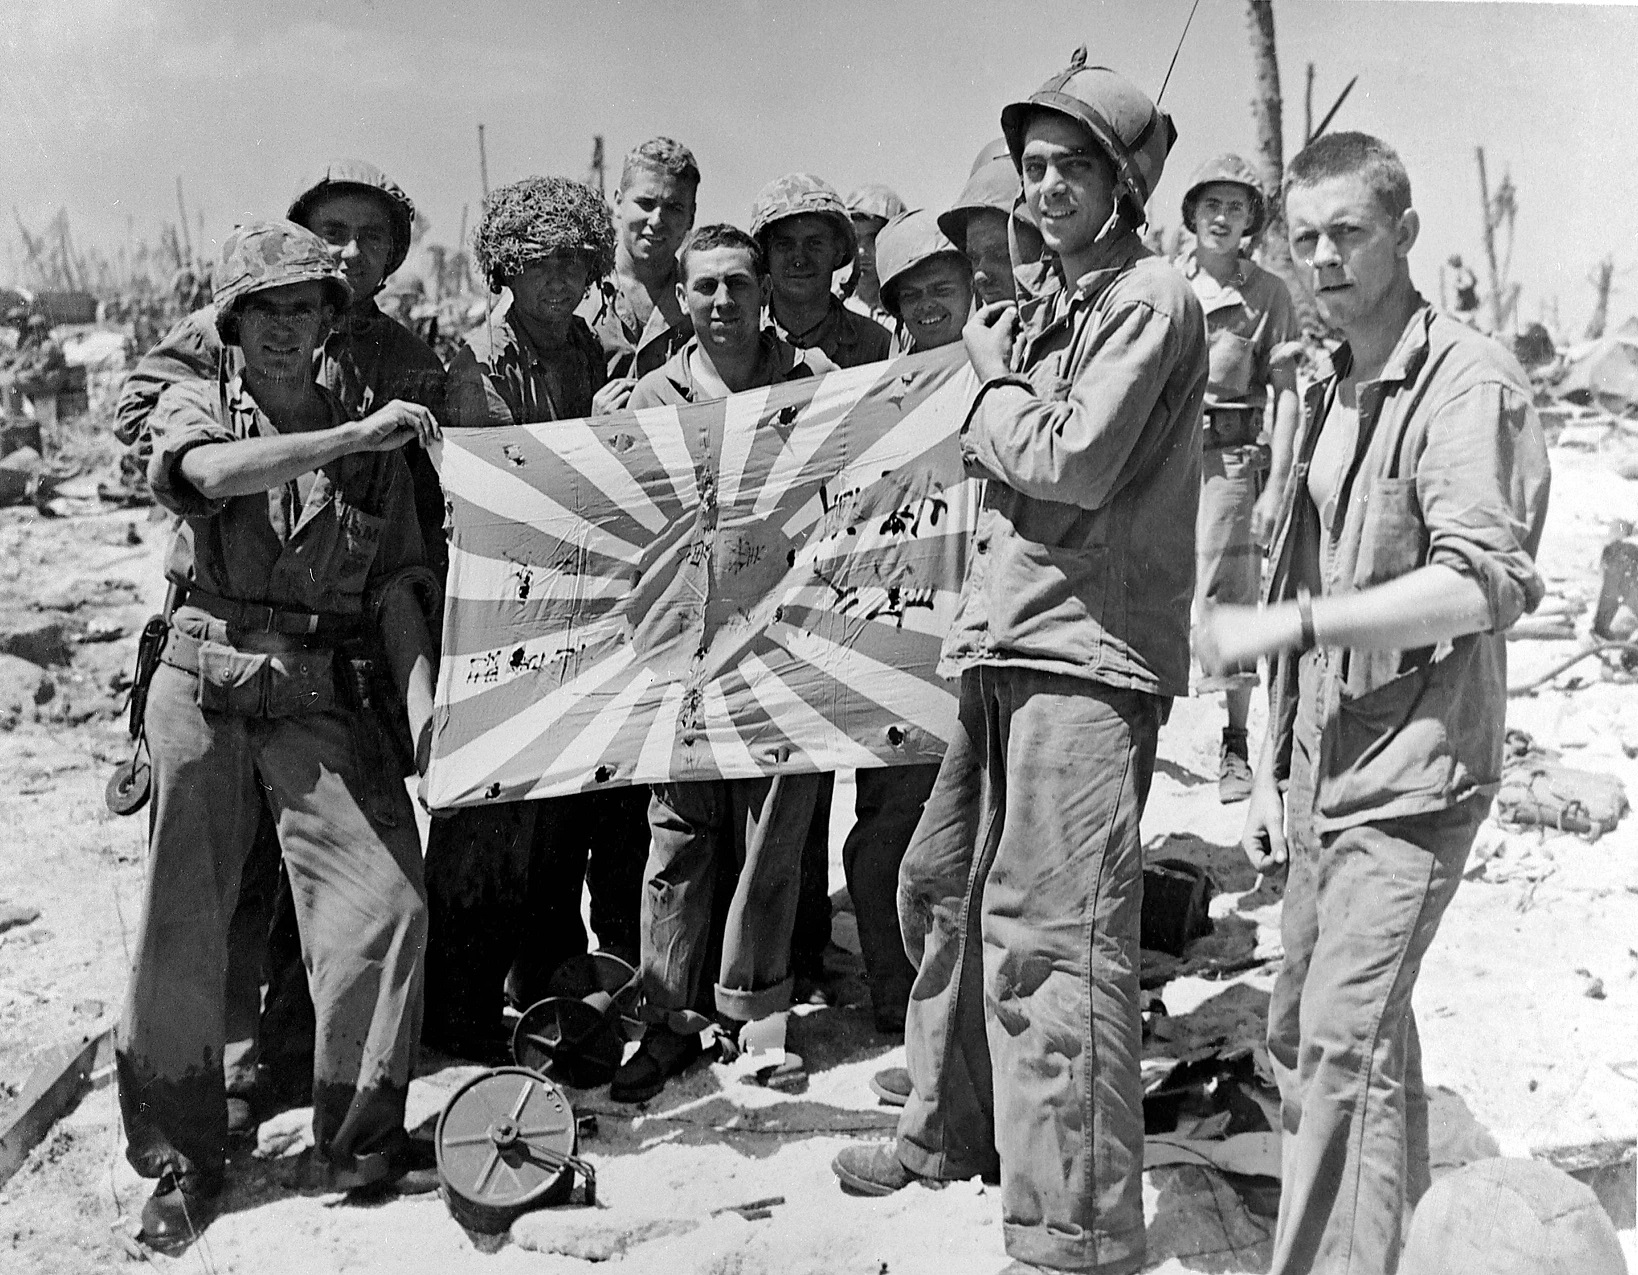 Marines and Coast Guardsmen with the Japanese flag now in the heritage collection of the US Coast Guard.  Engebi Island, Eniwetok Atoll, 19 February 1944. (National Archives Photo 80-G-216033).